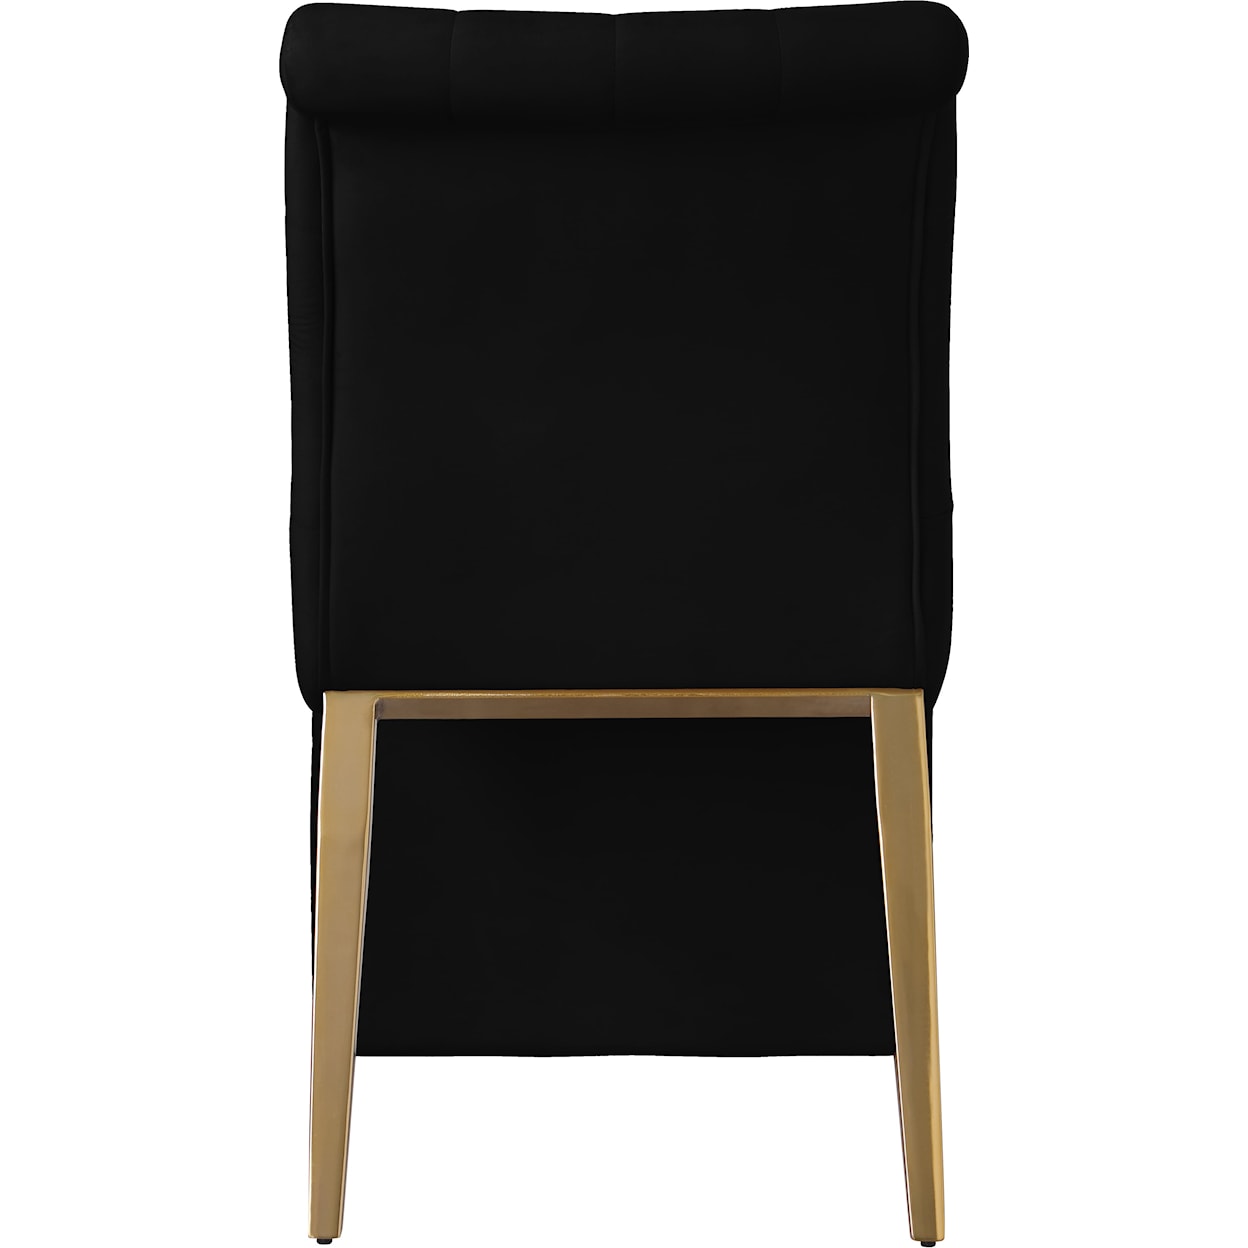 Meridian Furniture Curve Dining Chair